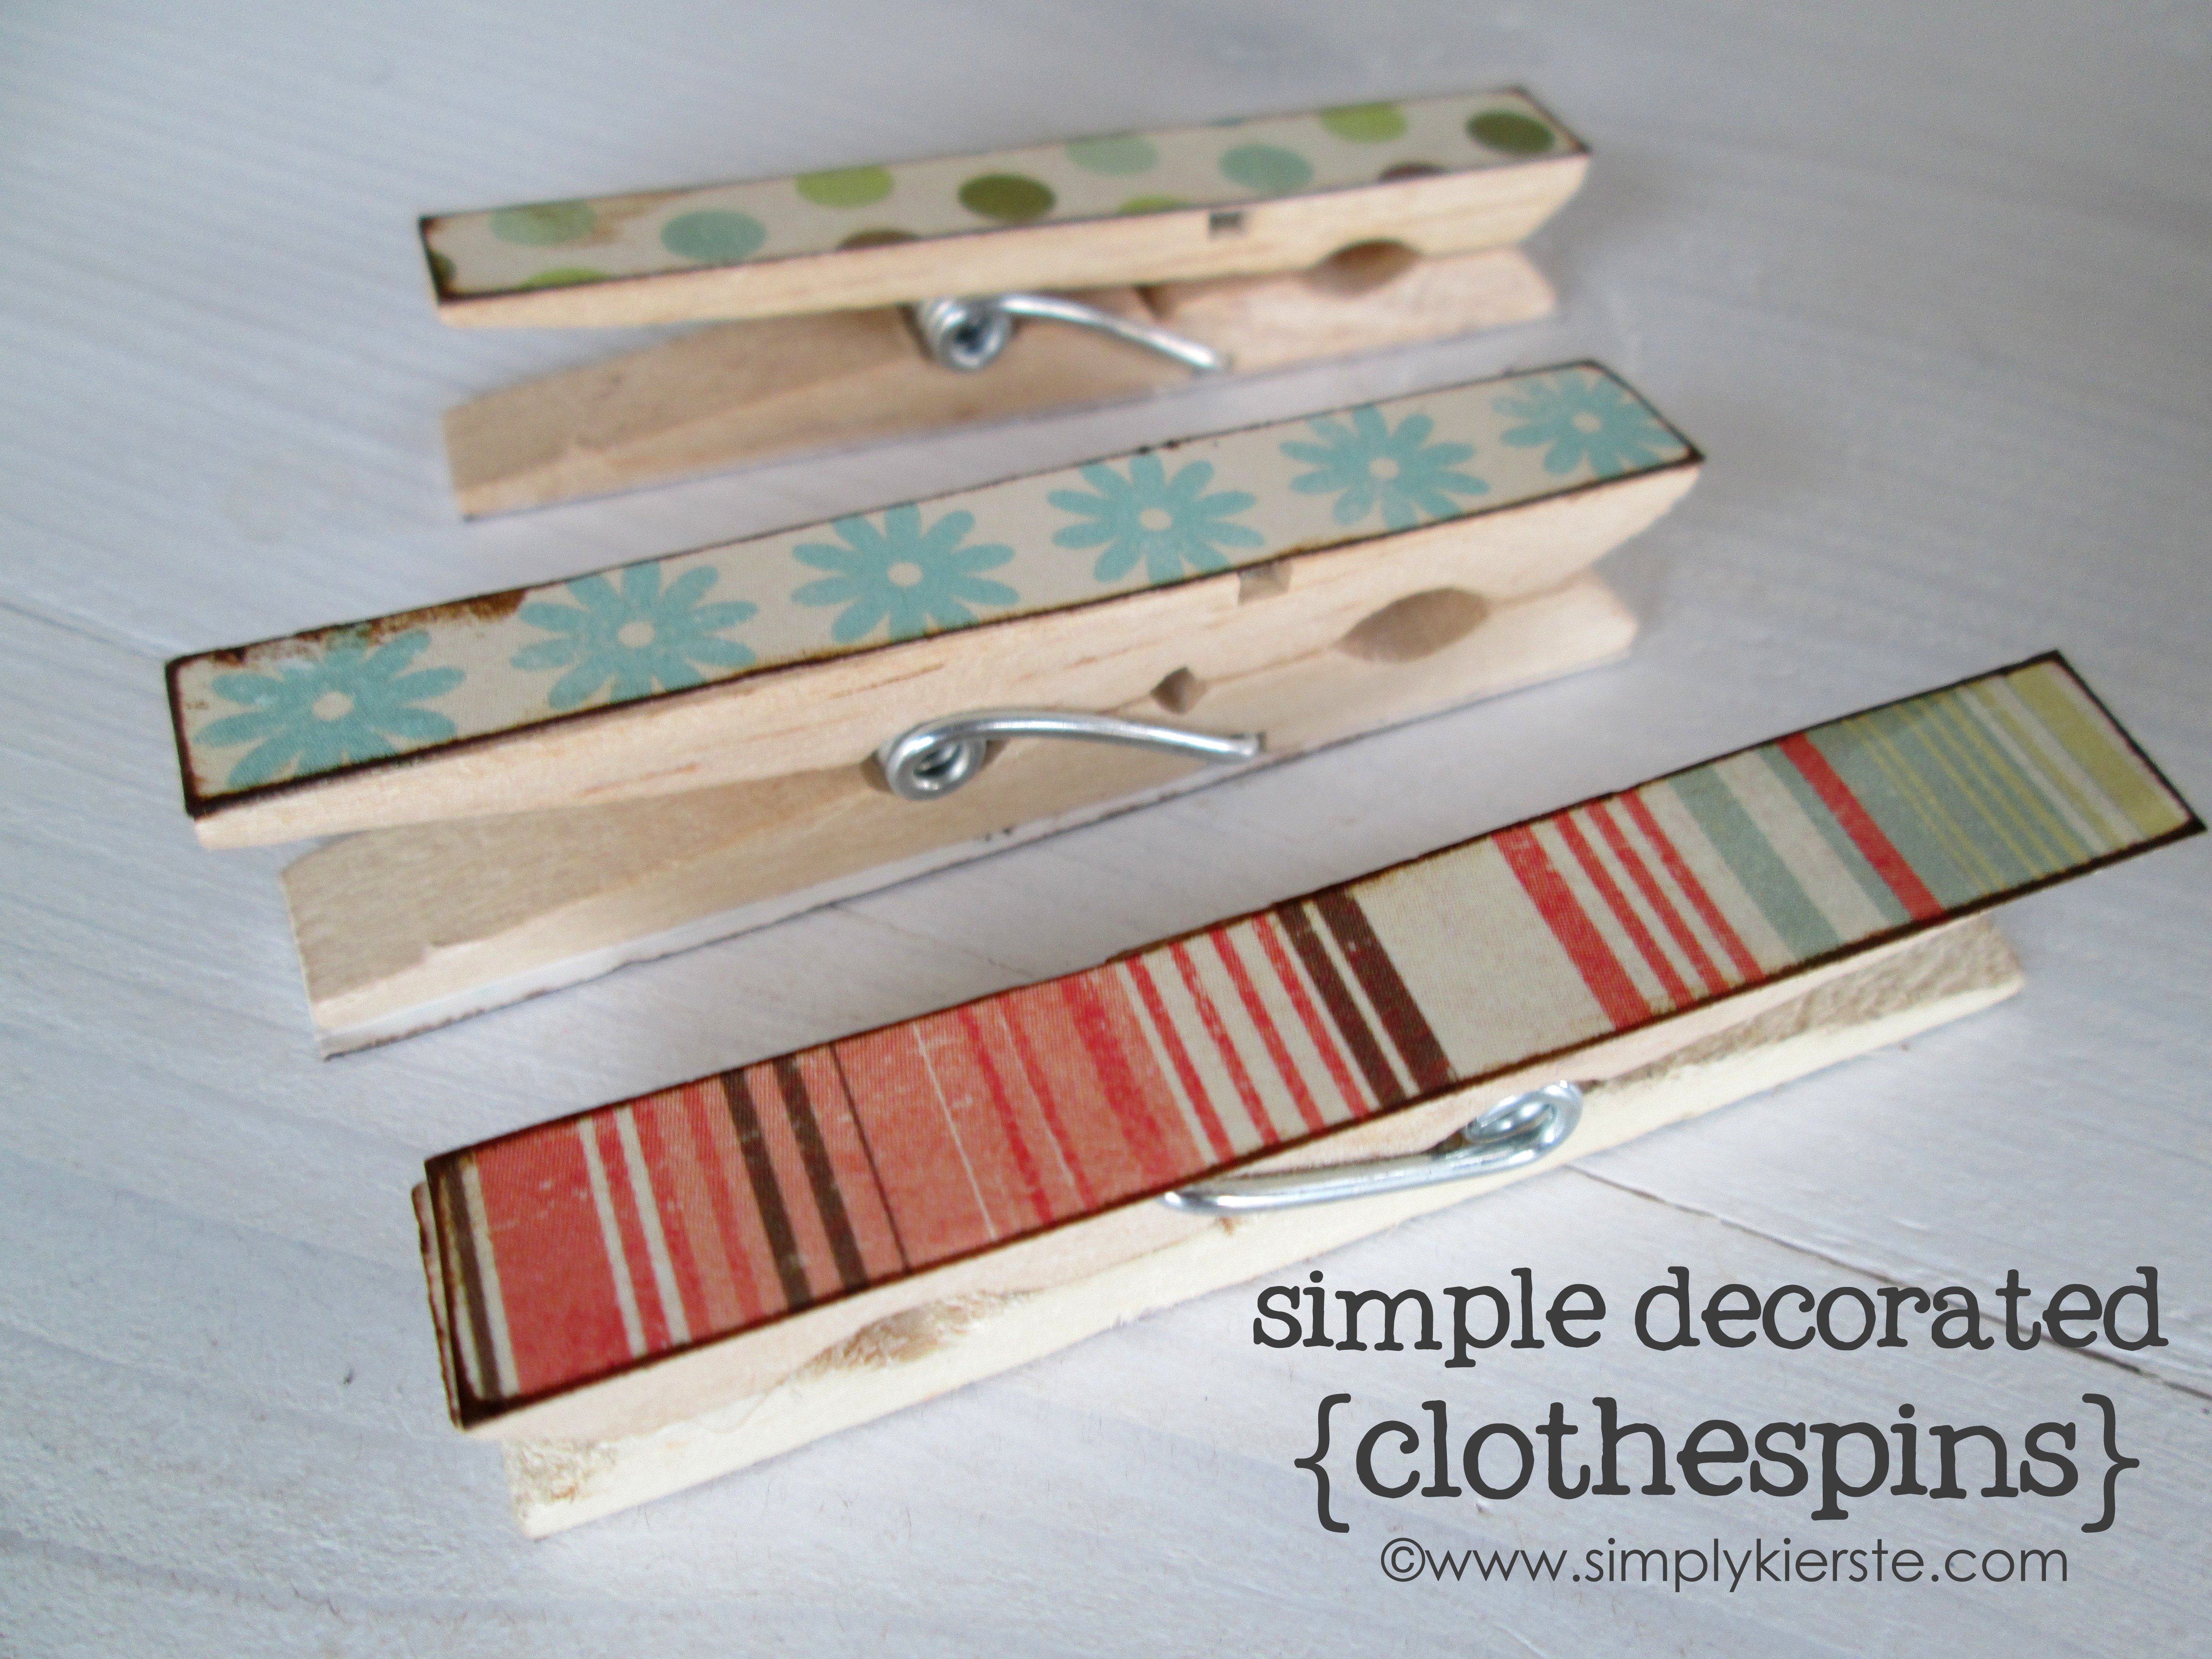 Simple Decorated Clothespins